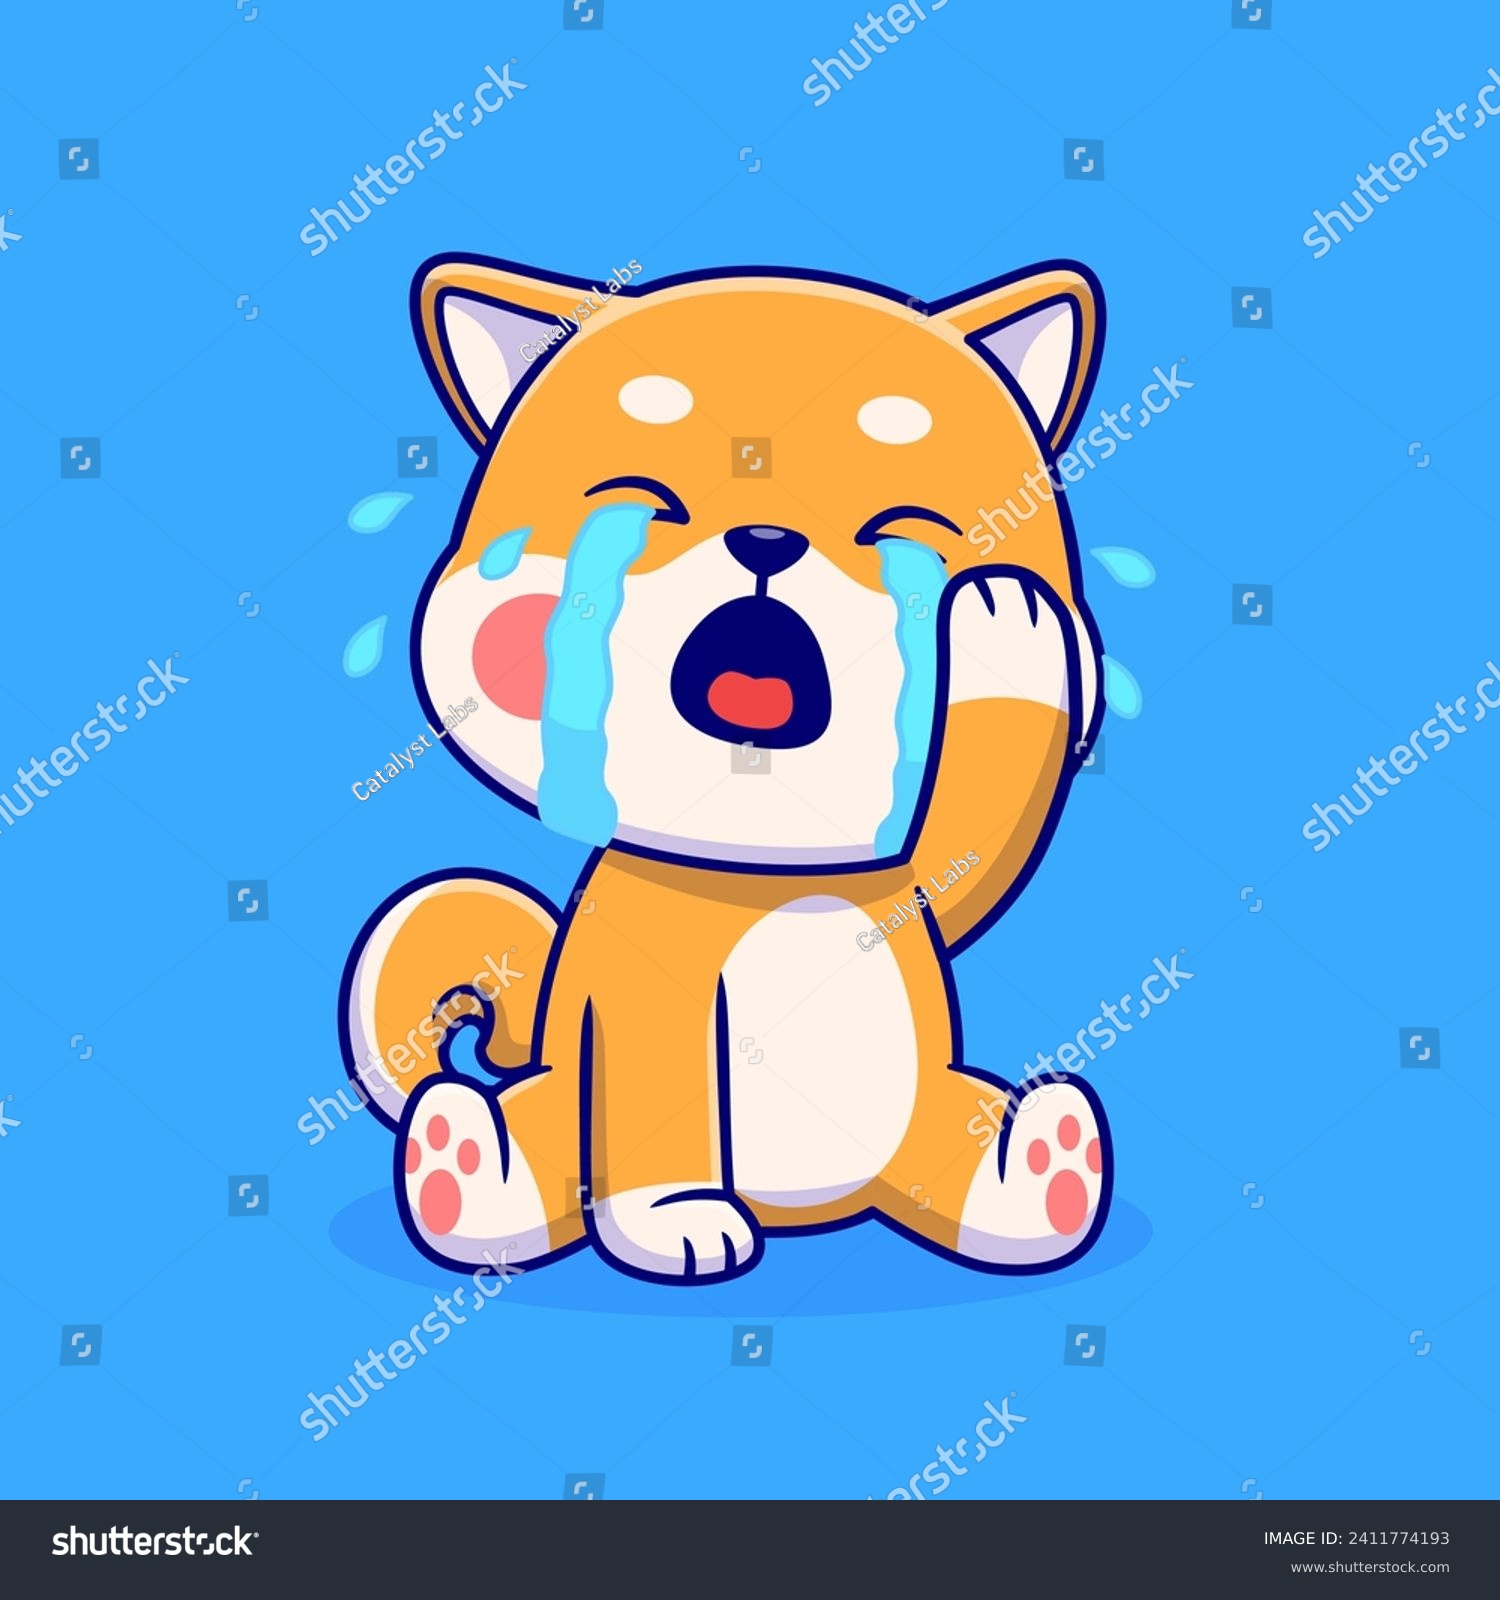 SVG of Cute Shiba Inu Dog Crying Cartoon Vector Icon Illustration.
Animal Nature Icon Concept Isolated Premium Vector. Flat
Cartoon Style svg